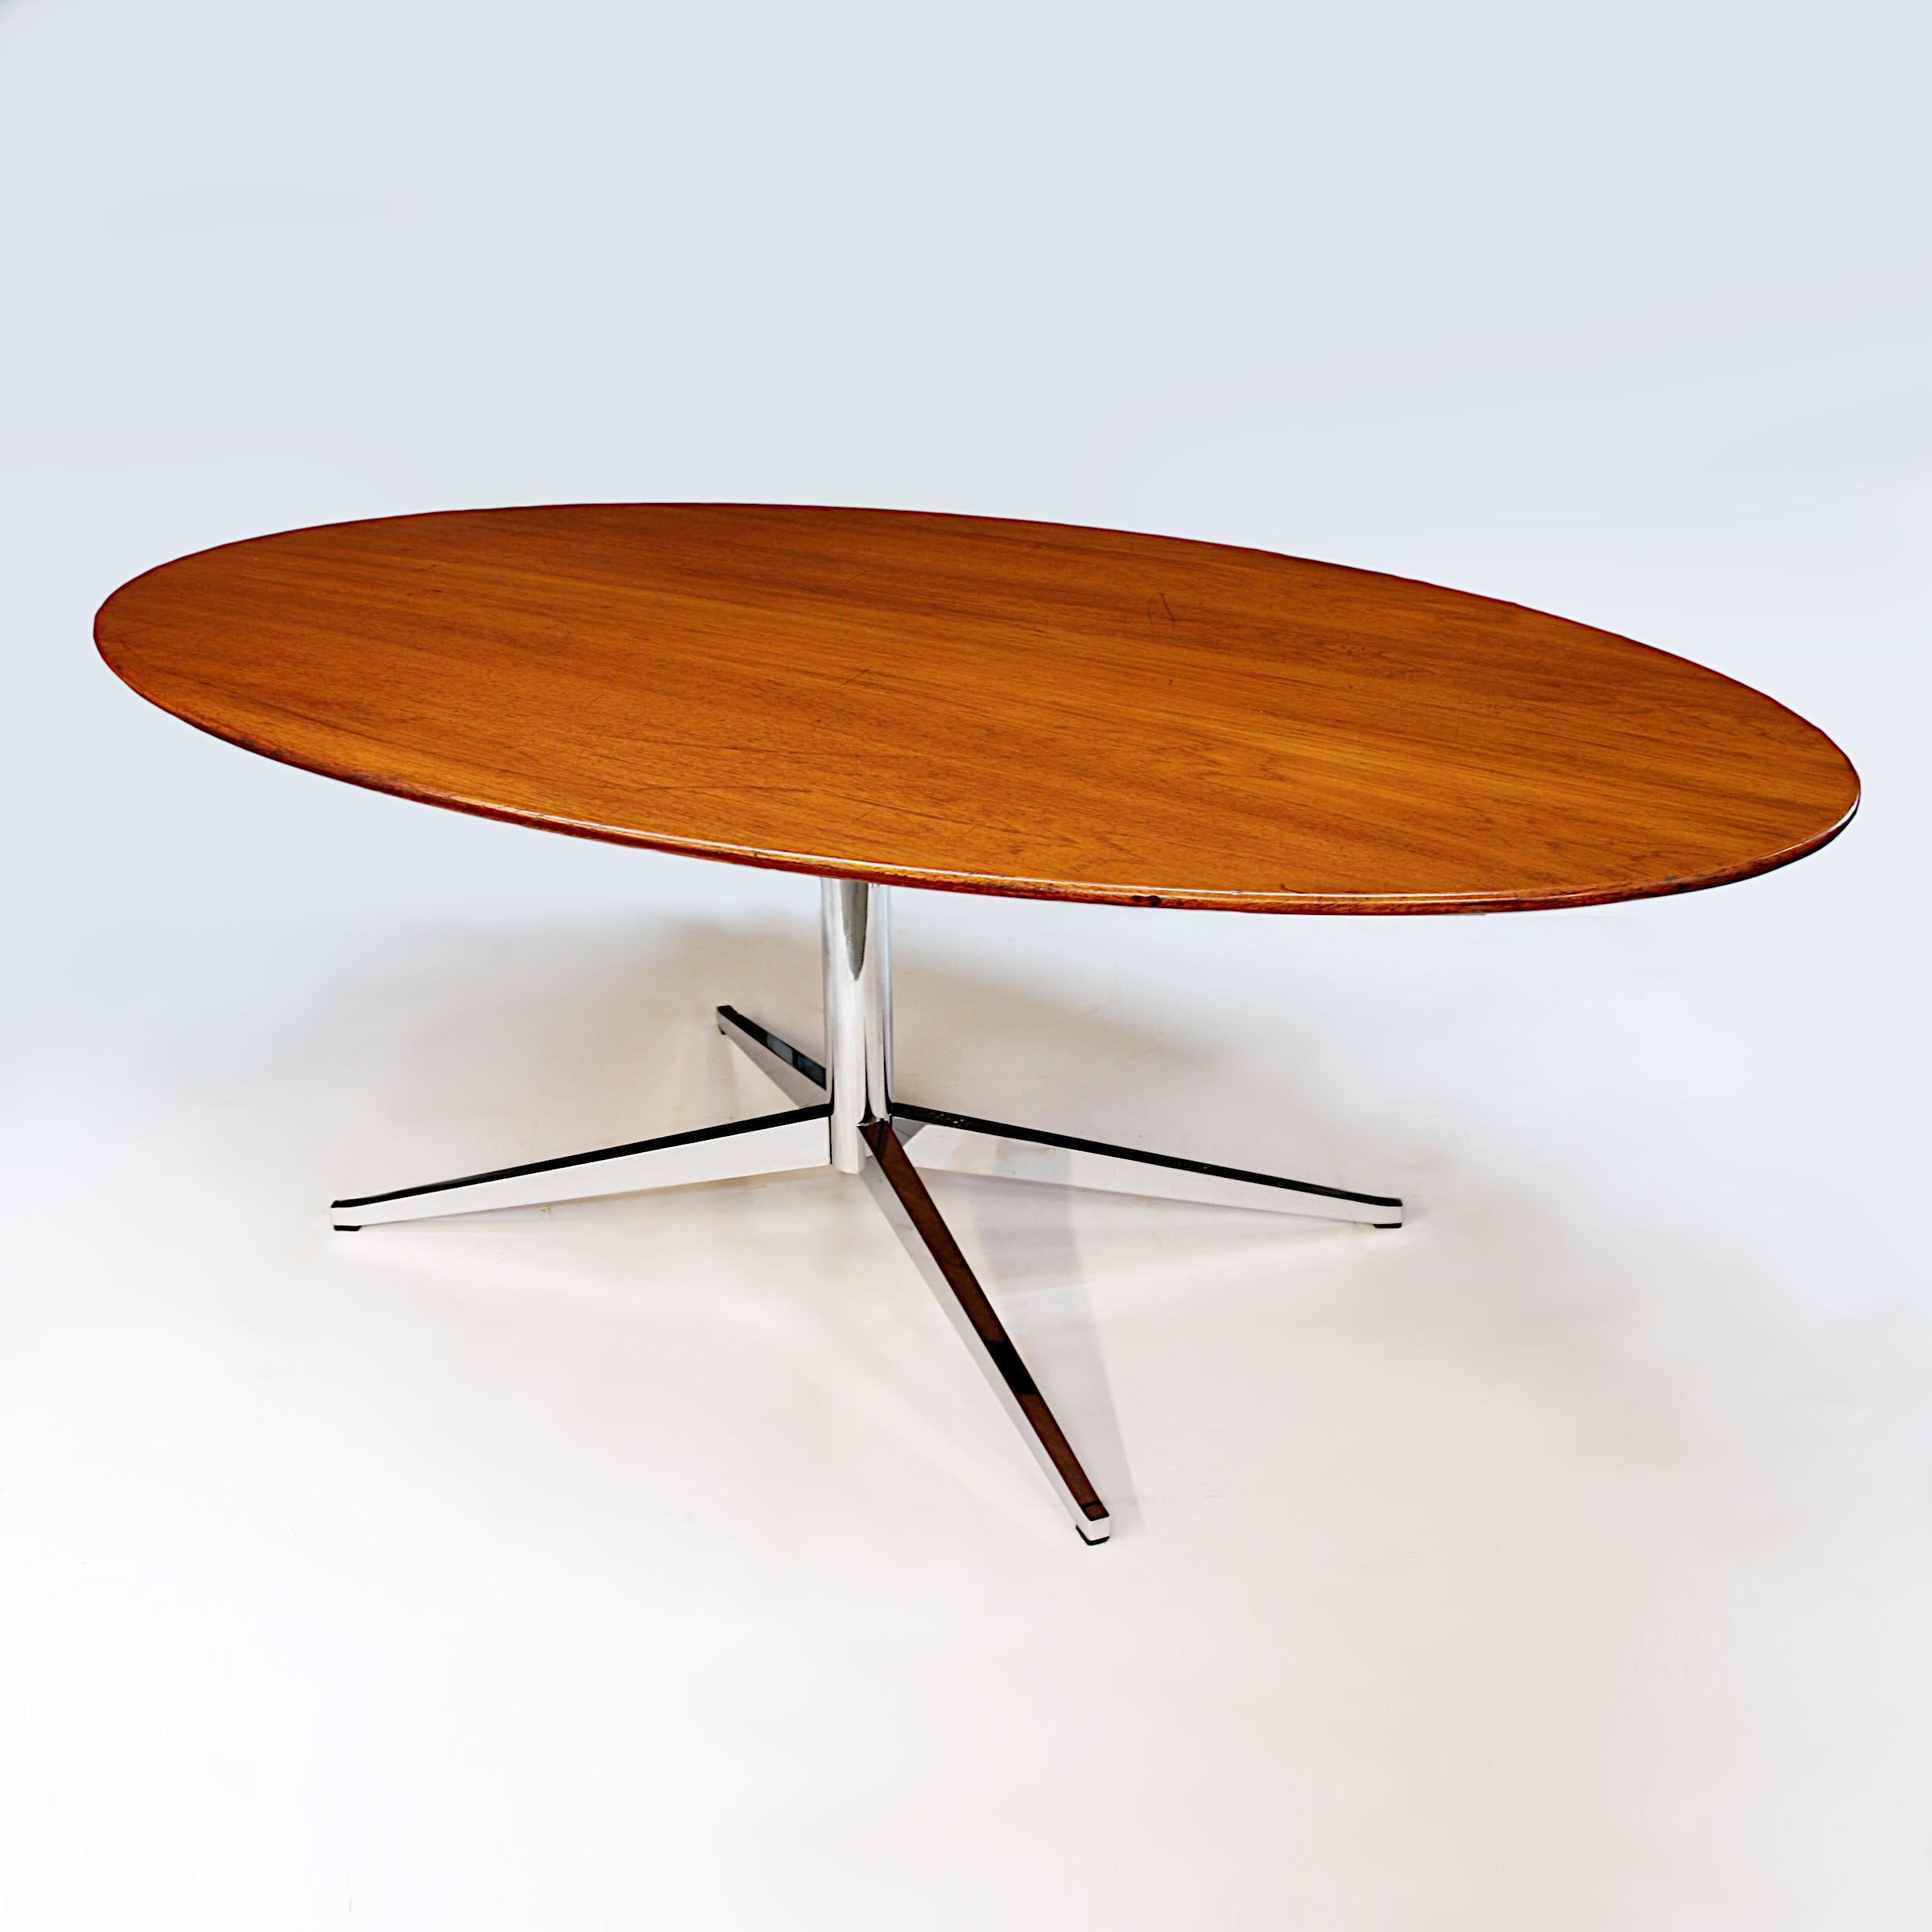 Very nice, 1960's Vintage Table Desk by Florence Knoll. Table features oak-veneered oval top and classic chrome base. A great example of an iconic midcentury design!